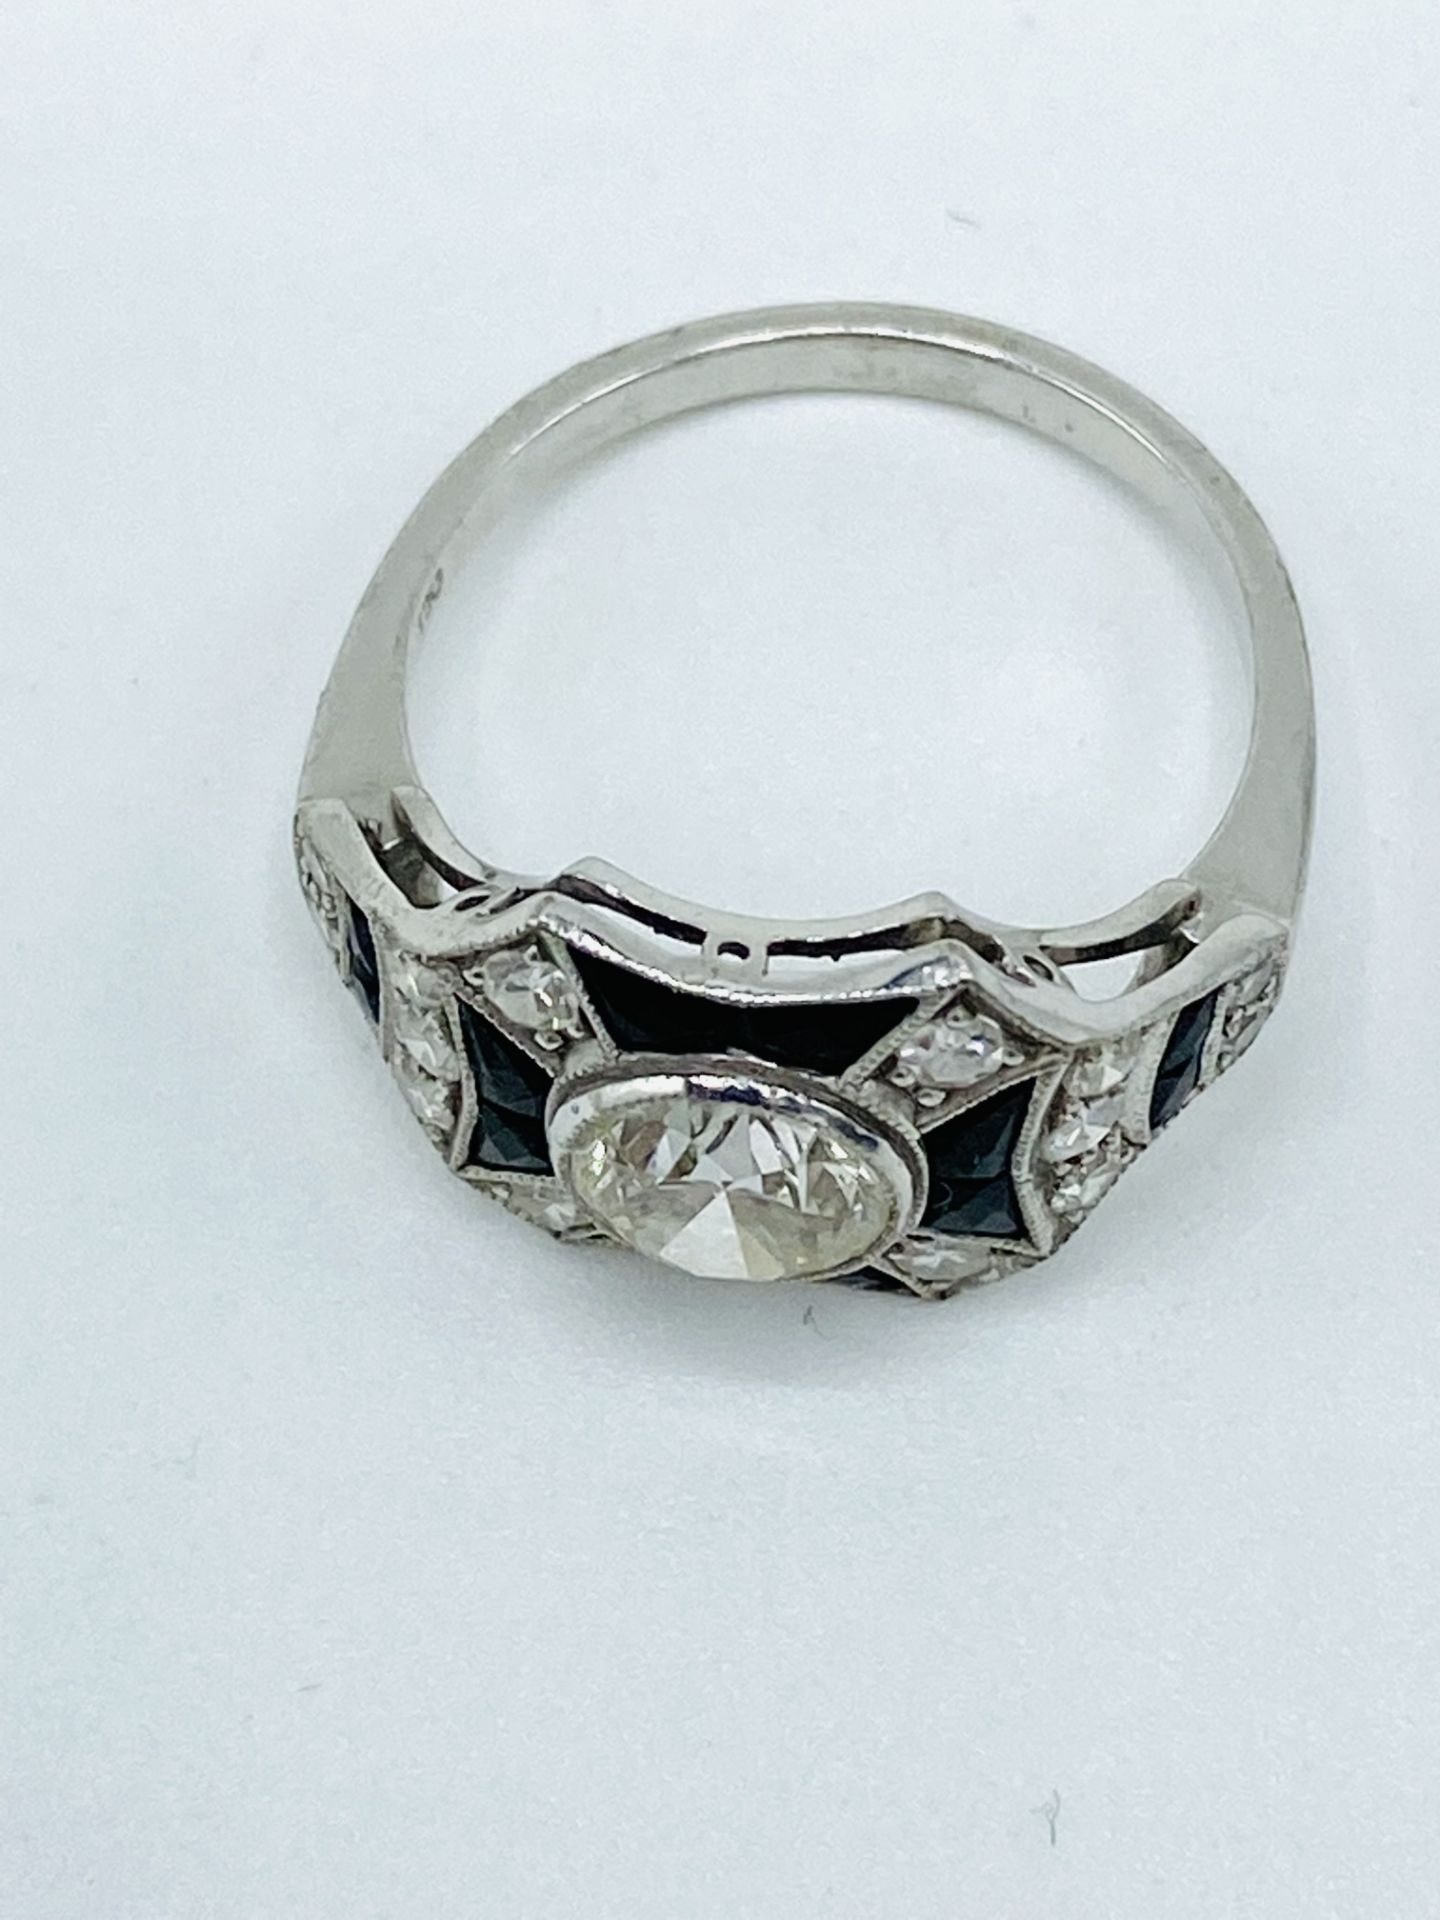 18ct white gold, diamond and black onyx ring - Image 4 of 6